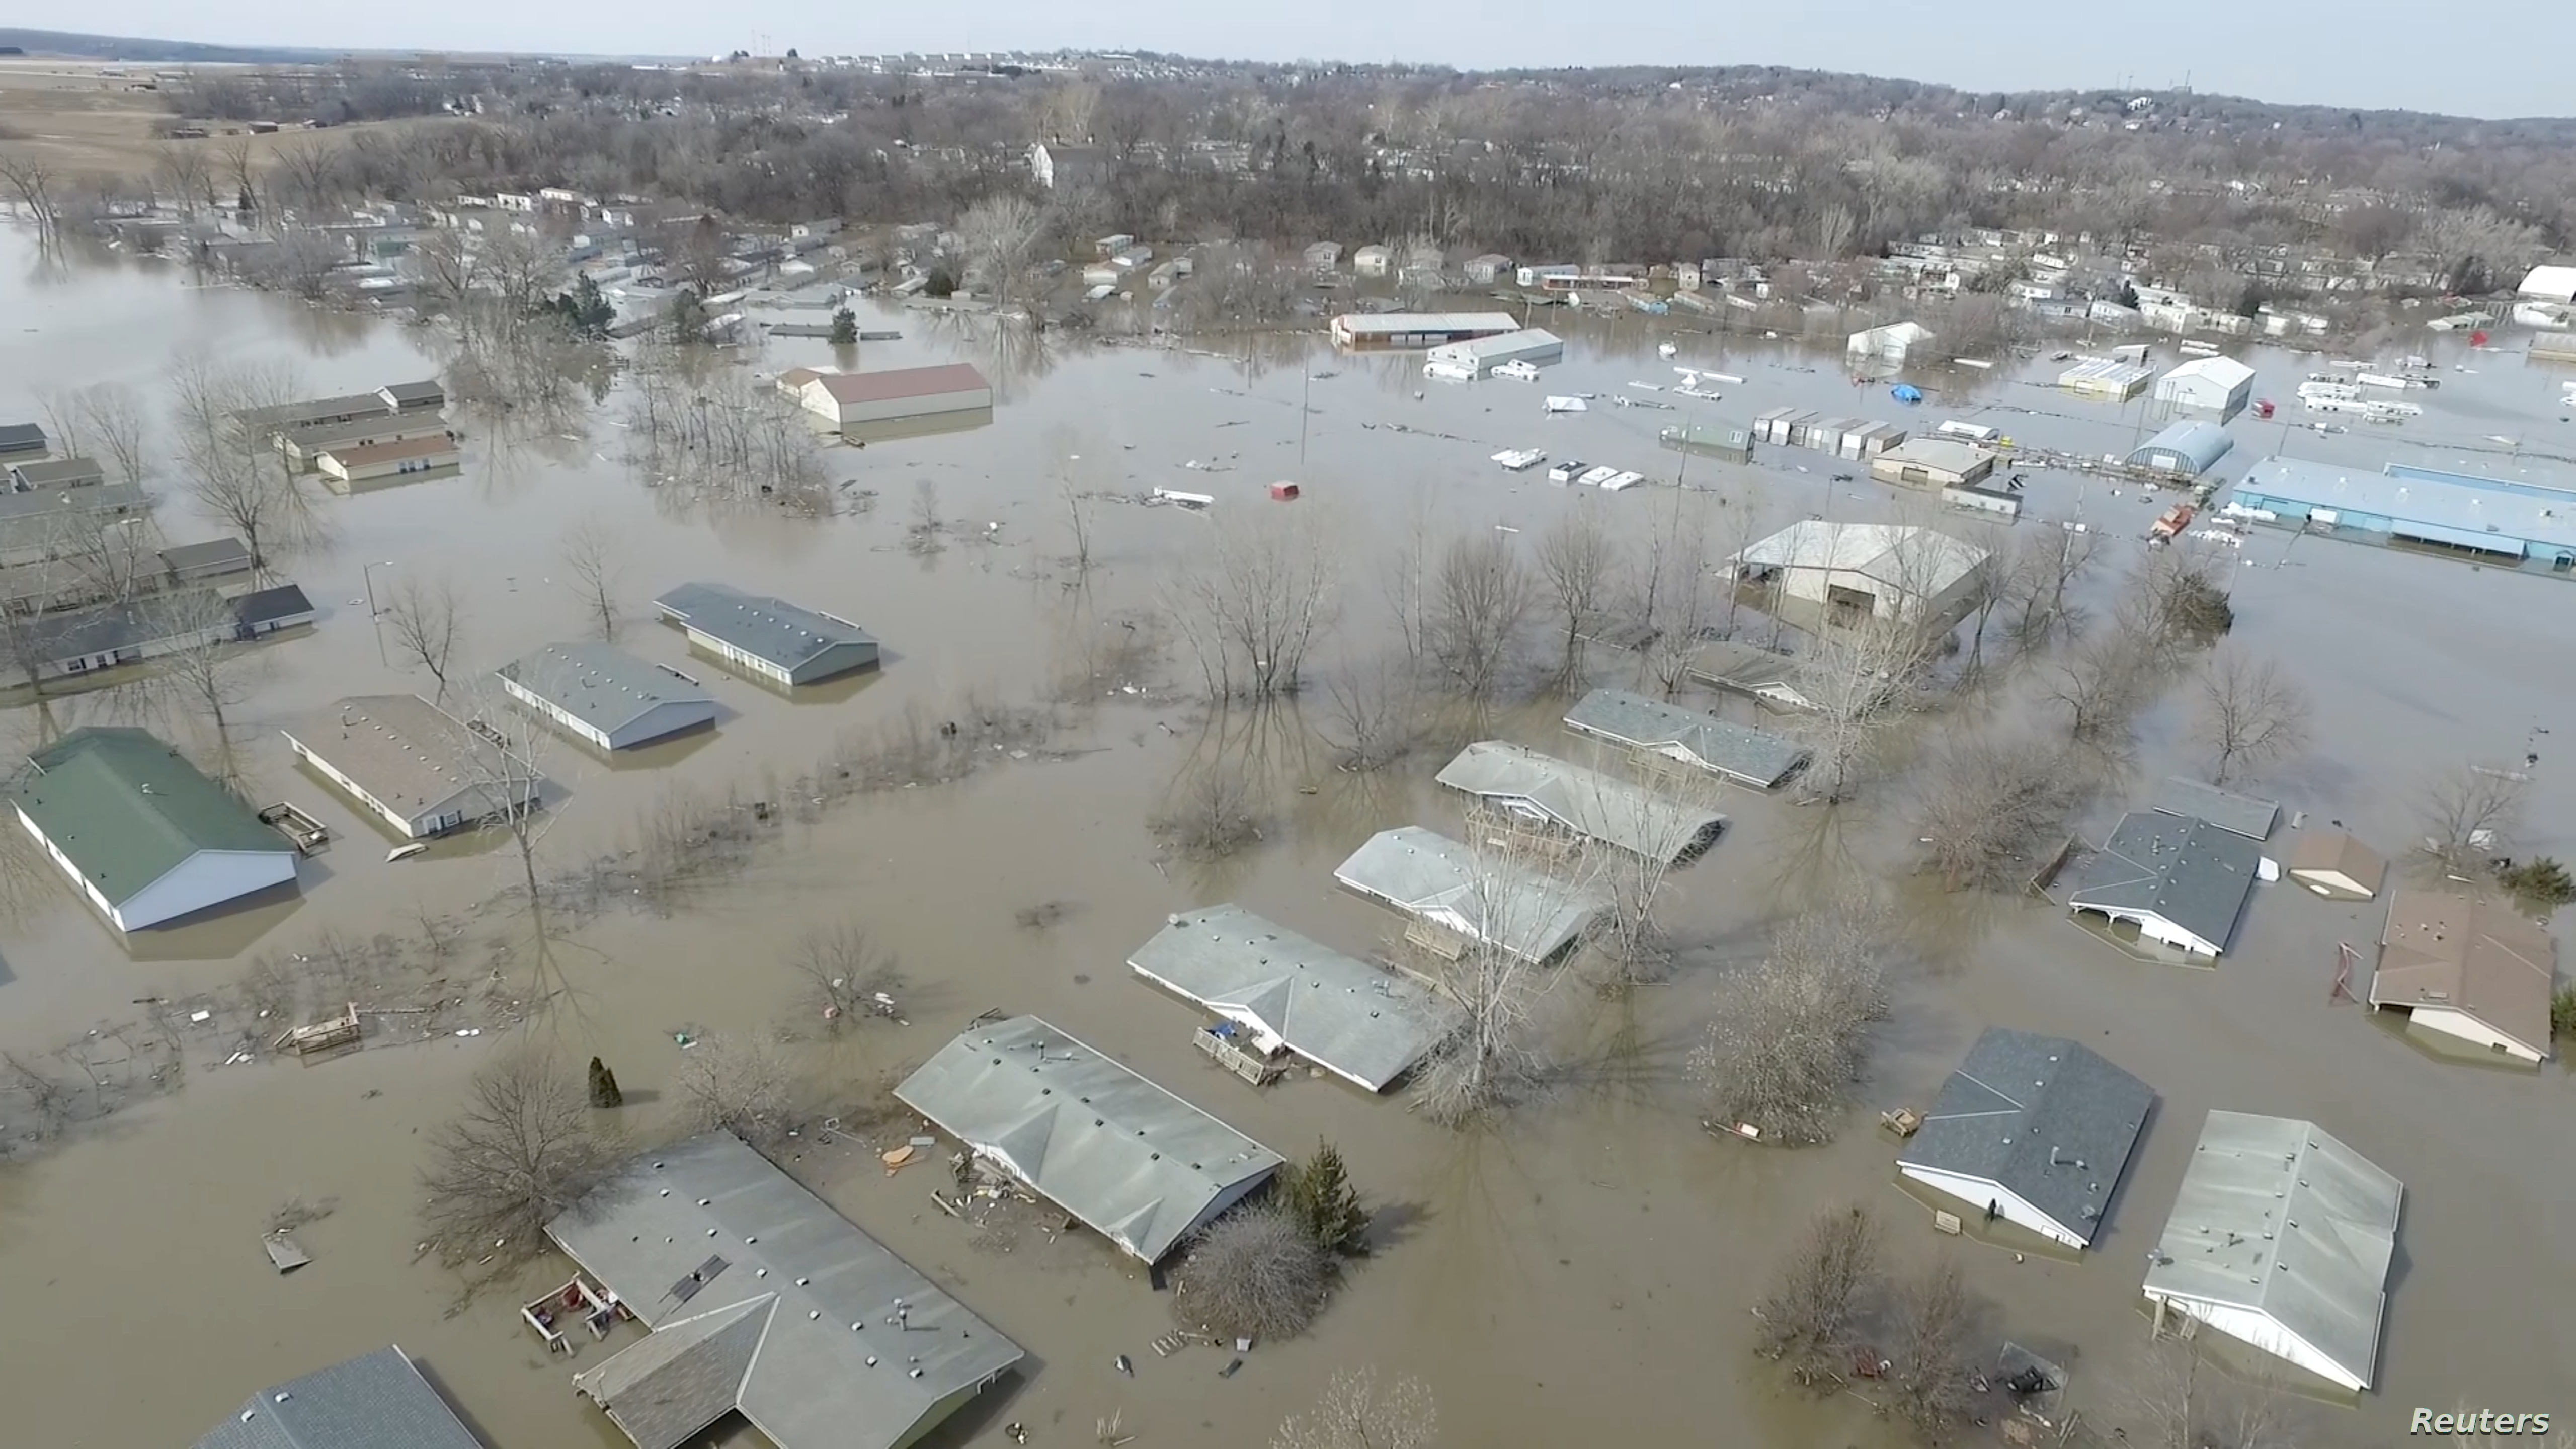 Torrential Rain Of Biblical Proportions Is Causing Immense Devastation For Midwest Farmers – End Of The American Dream